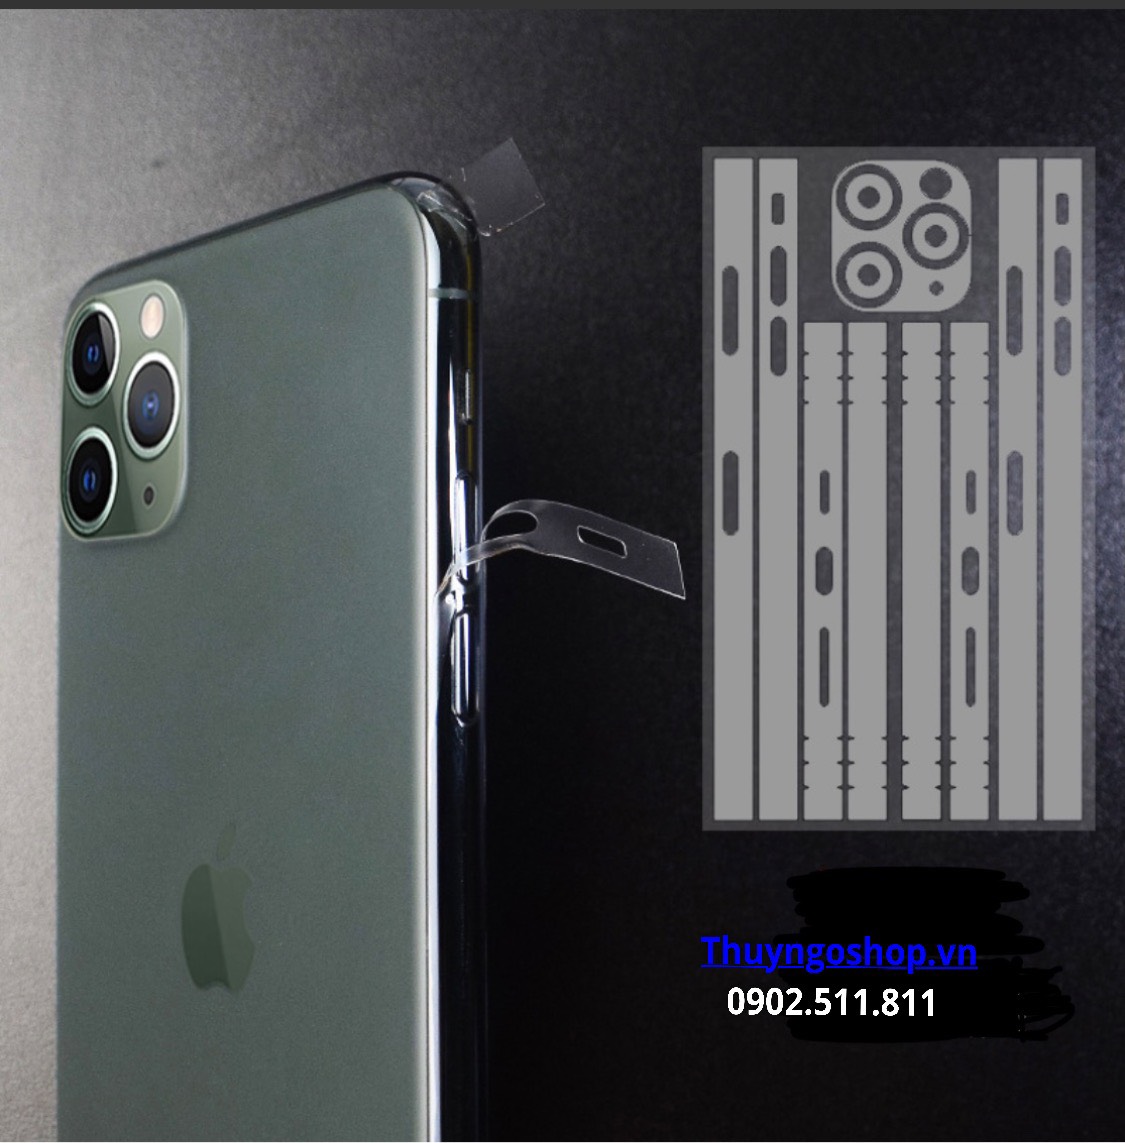 PPF 4 cạnh viền trong suốt / mờ Iphone Xs Max